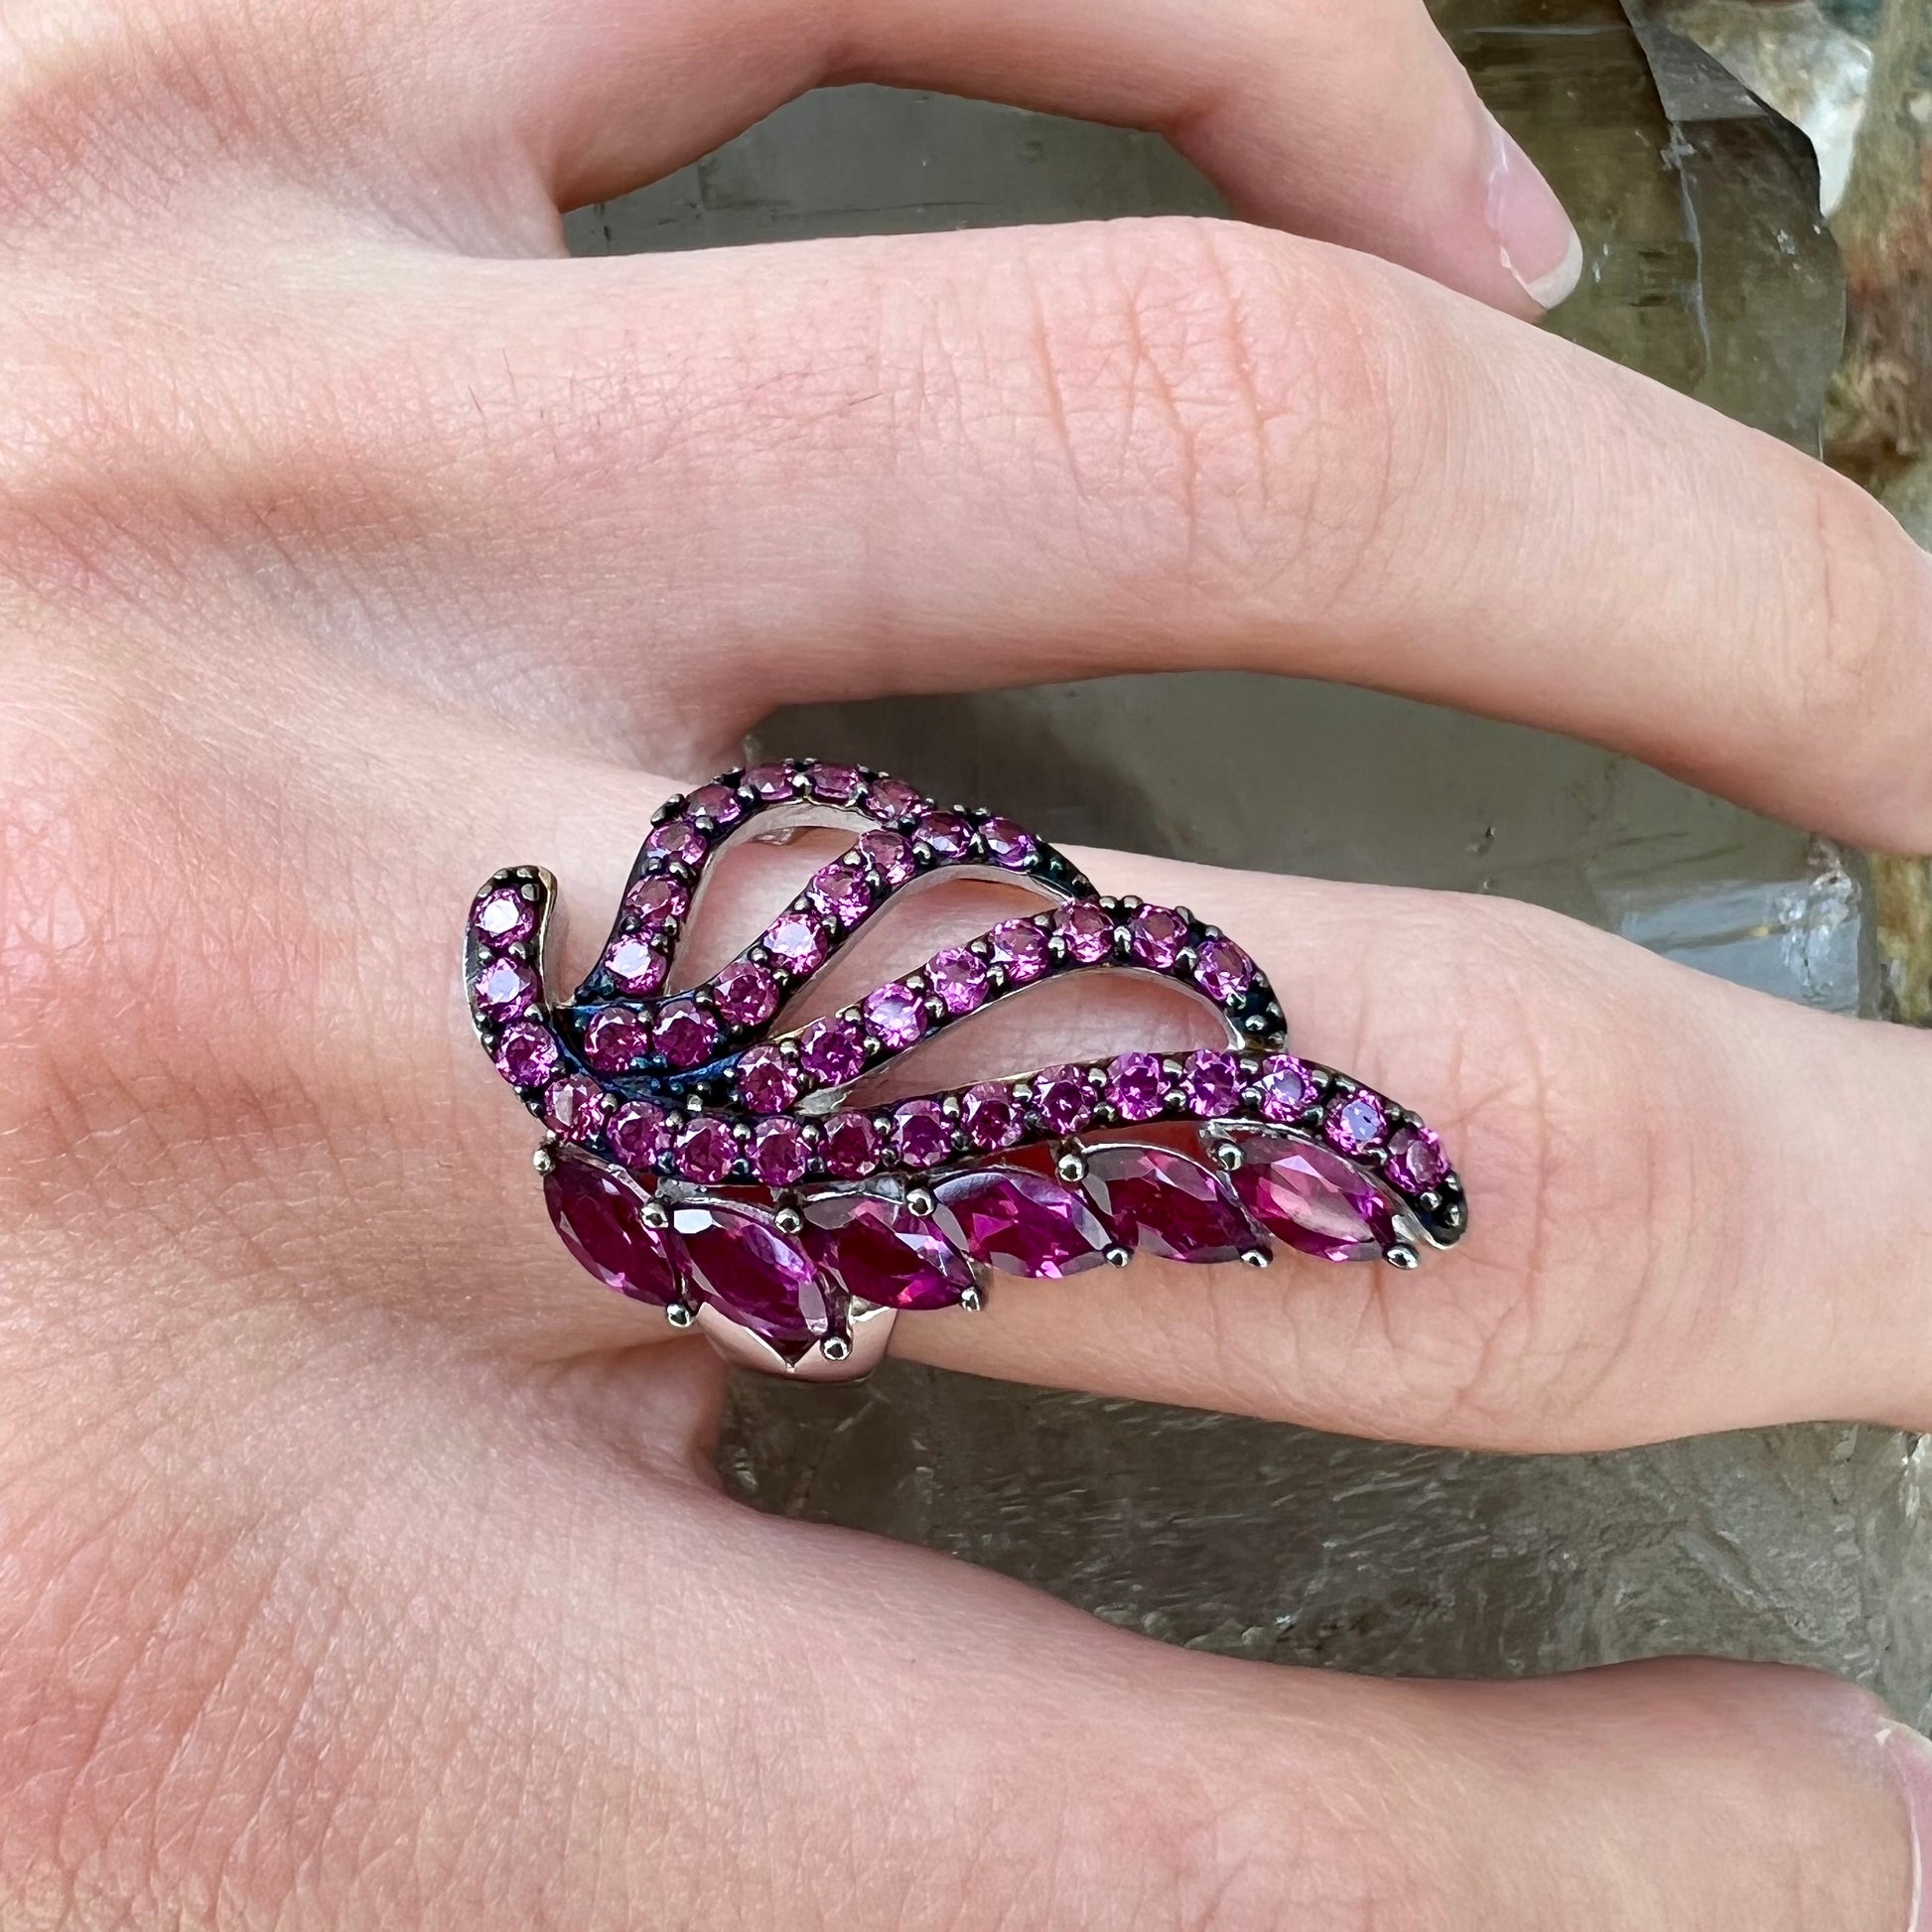 A sterling silver, feather shaped ring set with round and marquise cut rhodolite garnet stones.